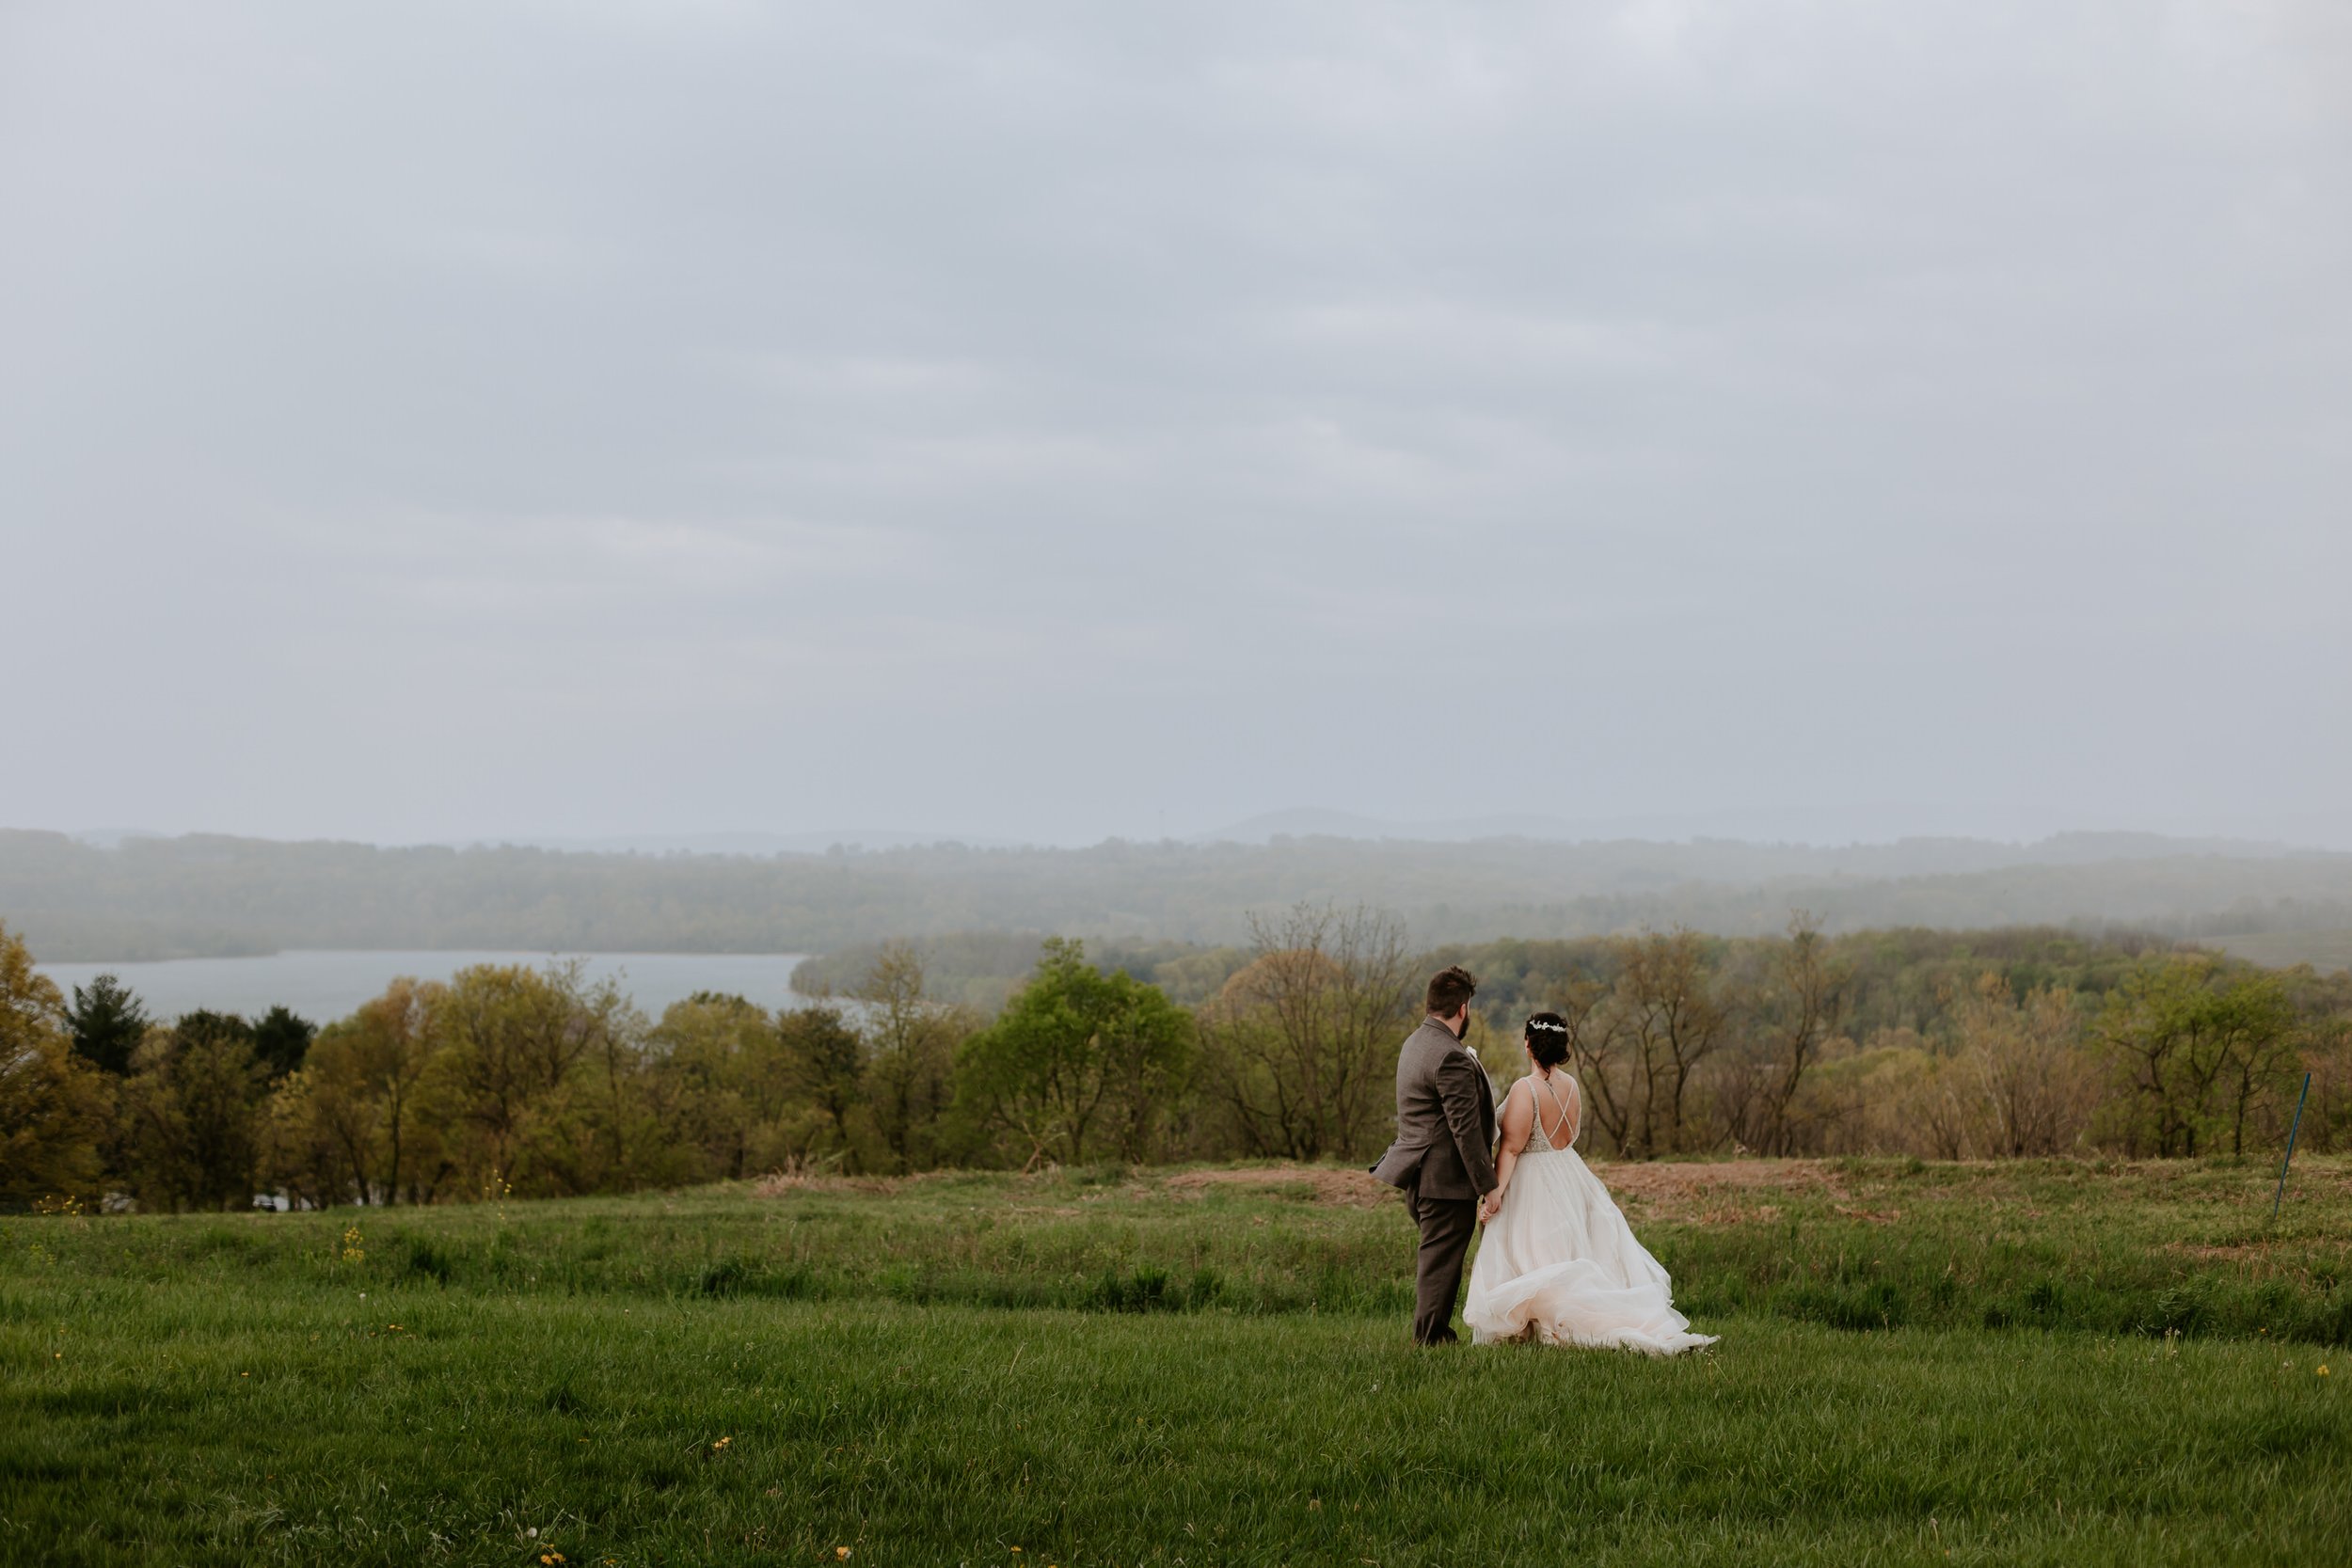 Man and woman in wedding attire look out over open landscape.